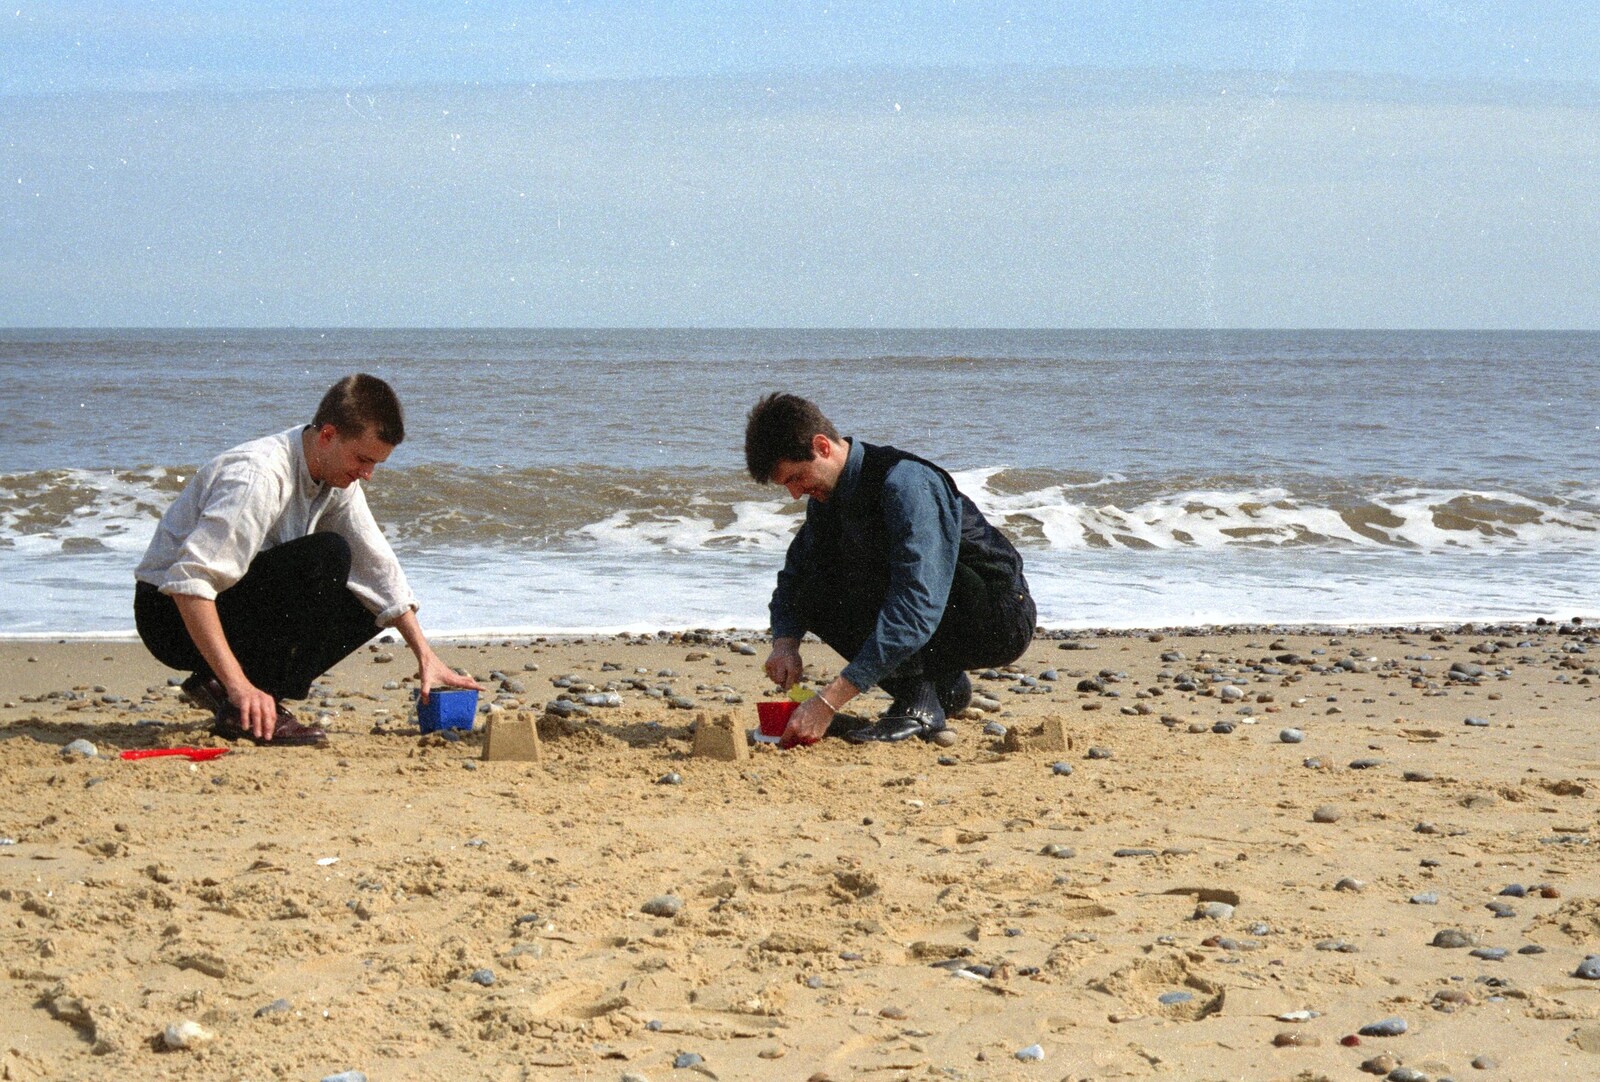 A Phil and Sean Weekend, and Bedroom Building, Brome, Norwich and Southwold - 18th April 1995: Nosher and Sean on the beach